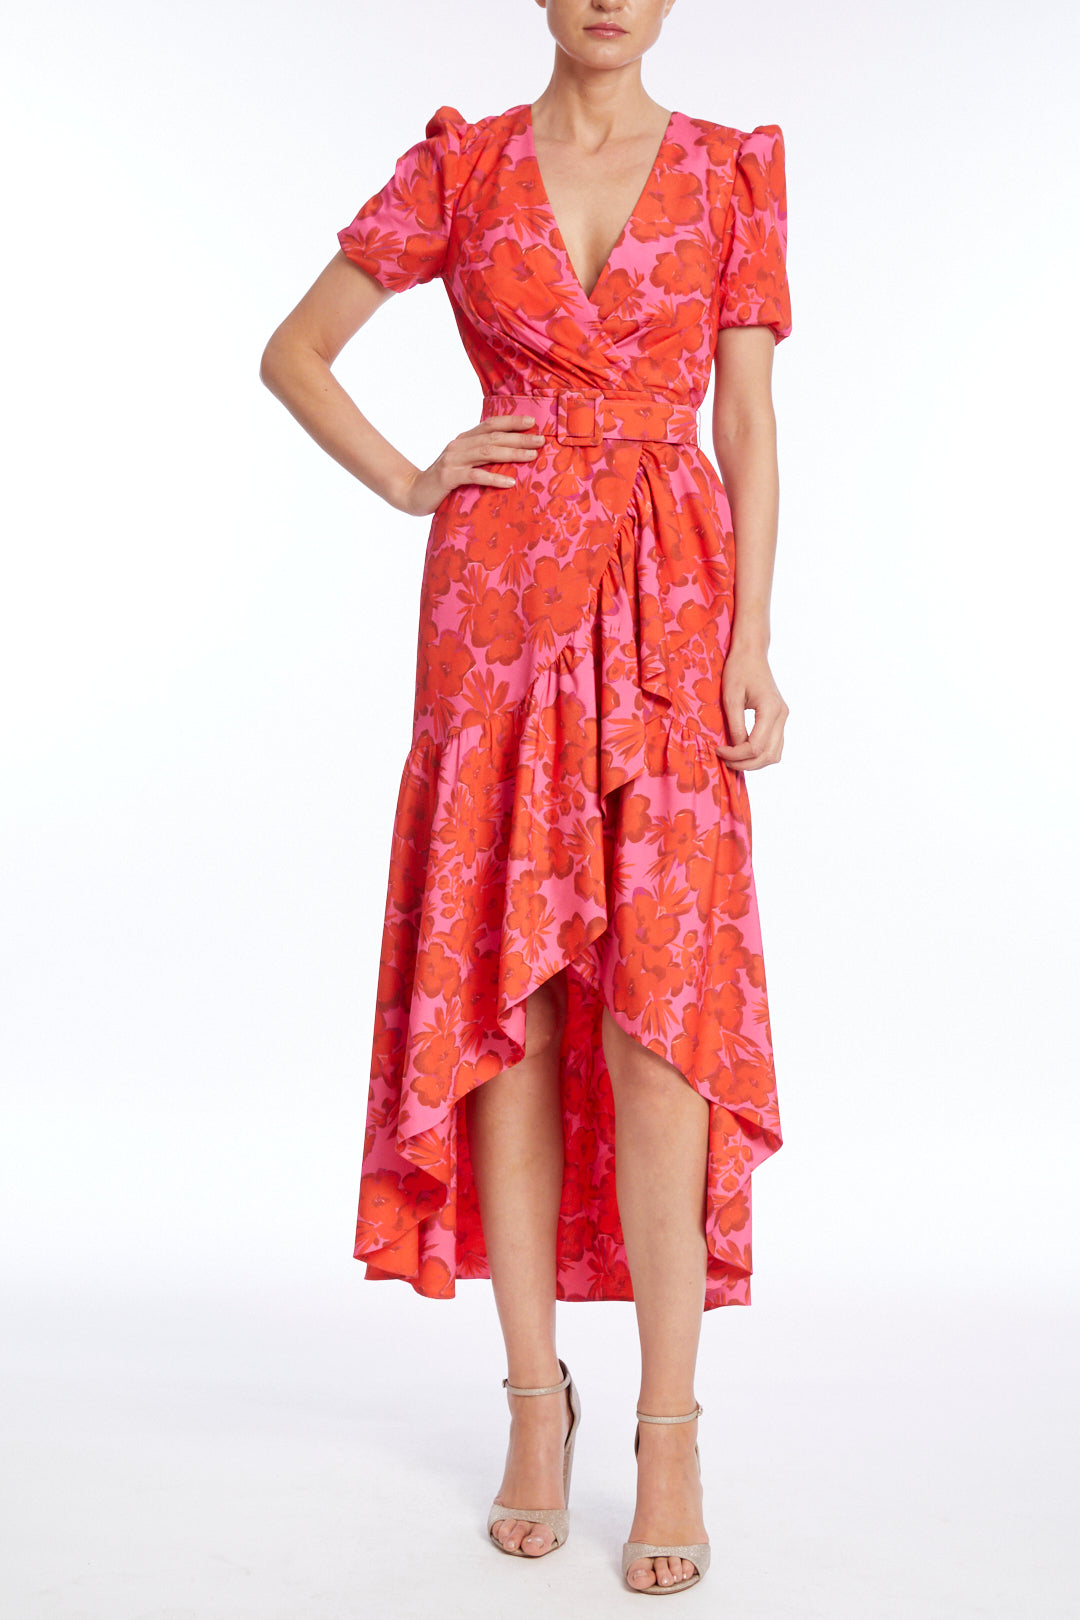 Beautiful pink & red floral flounce dress by Badgley Mischka.